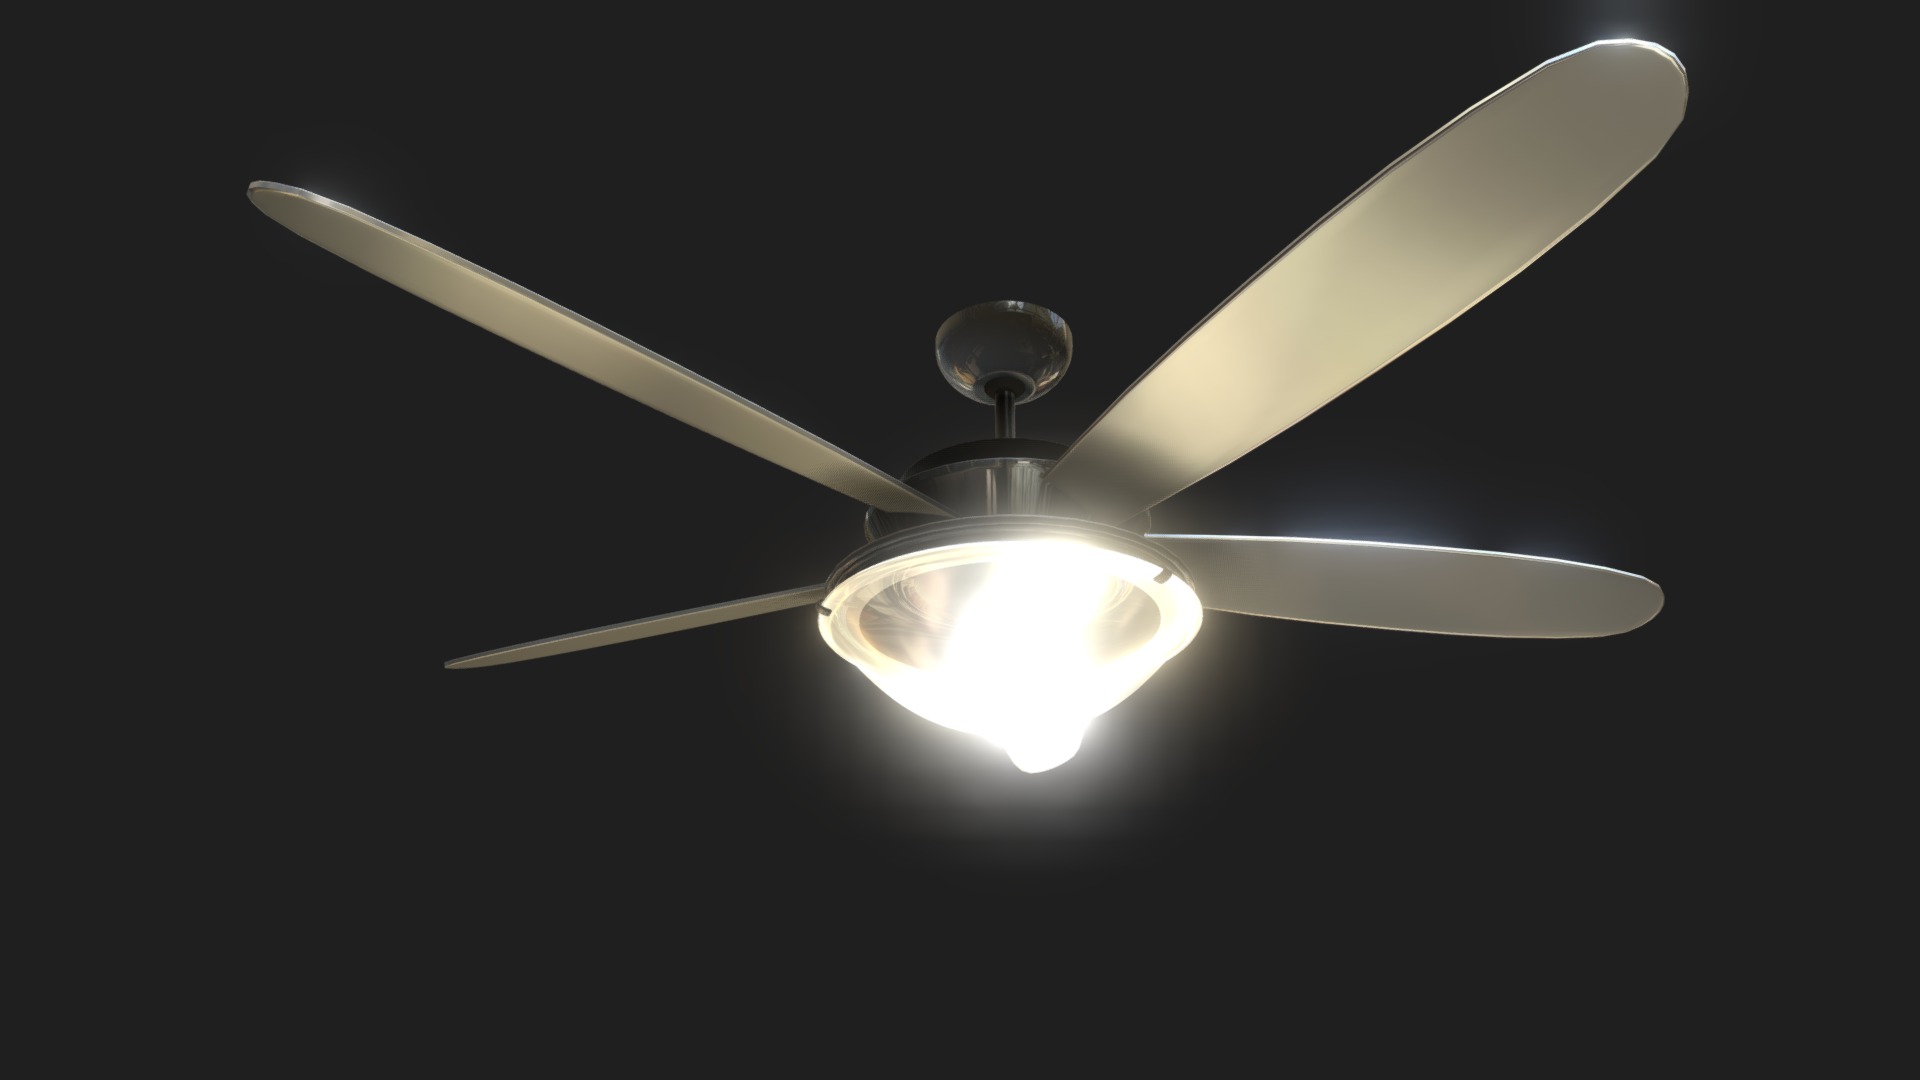 3D model HGP29409 - This is a 3D model of the HGP29409. The 3D model is about a ceiling fan with a light.